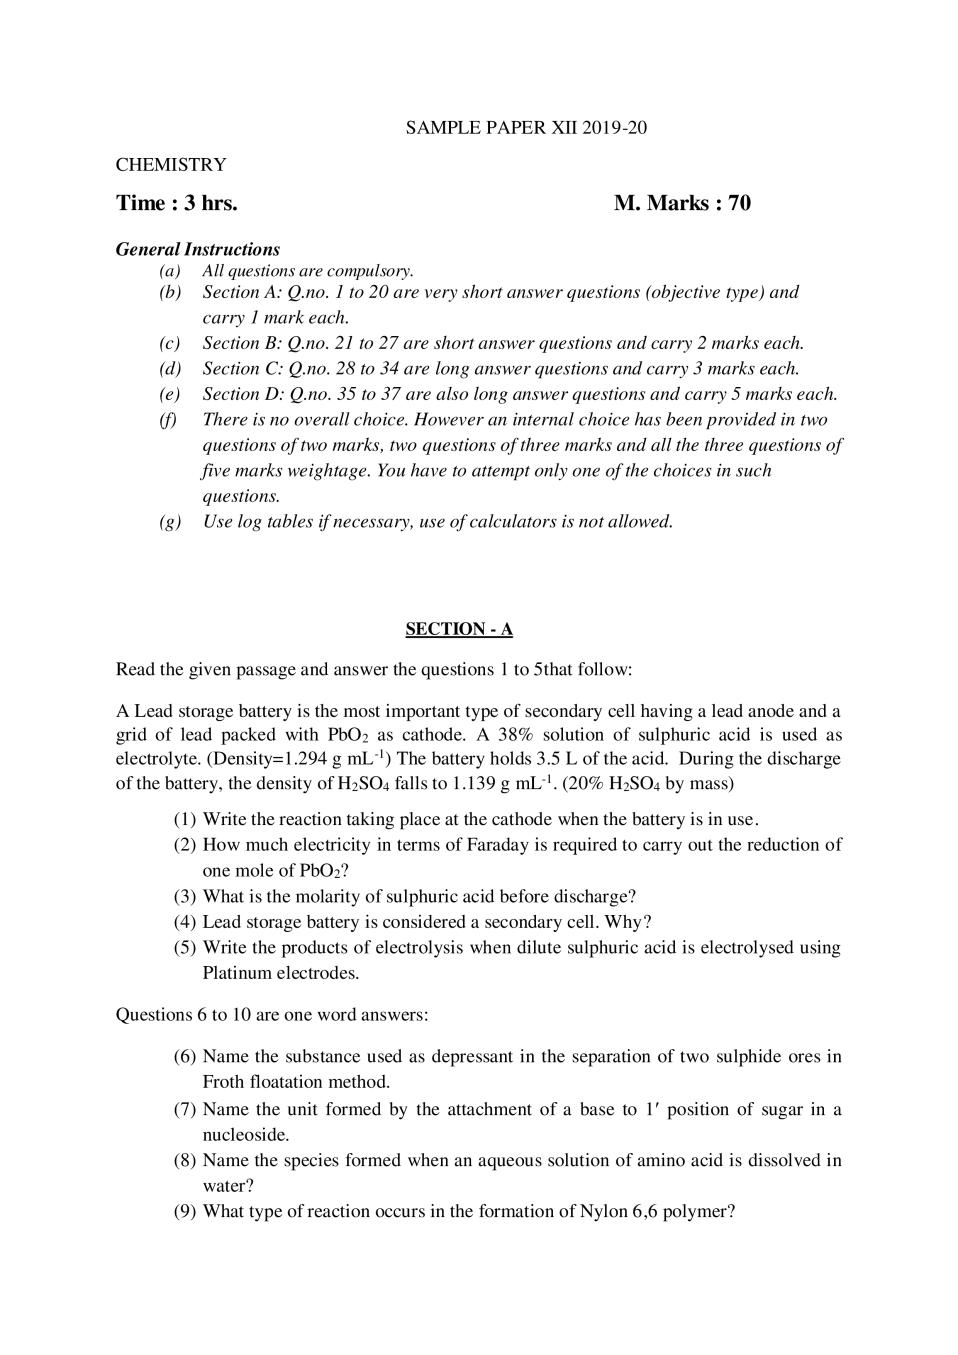 CBSE Class 12 Sample Paper 2020 for Chemistry - Page 1